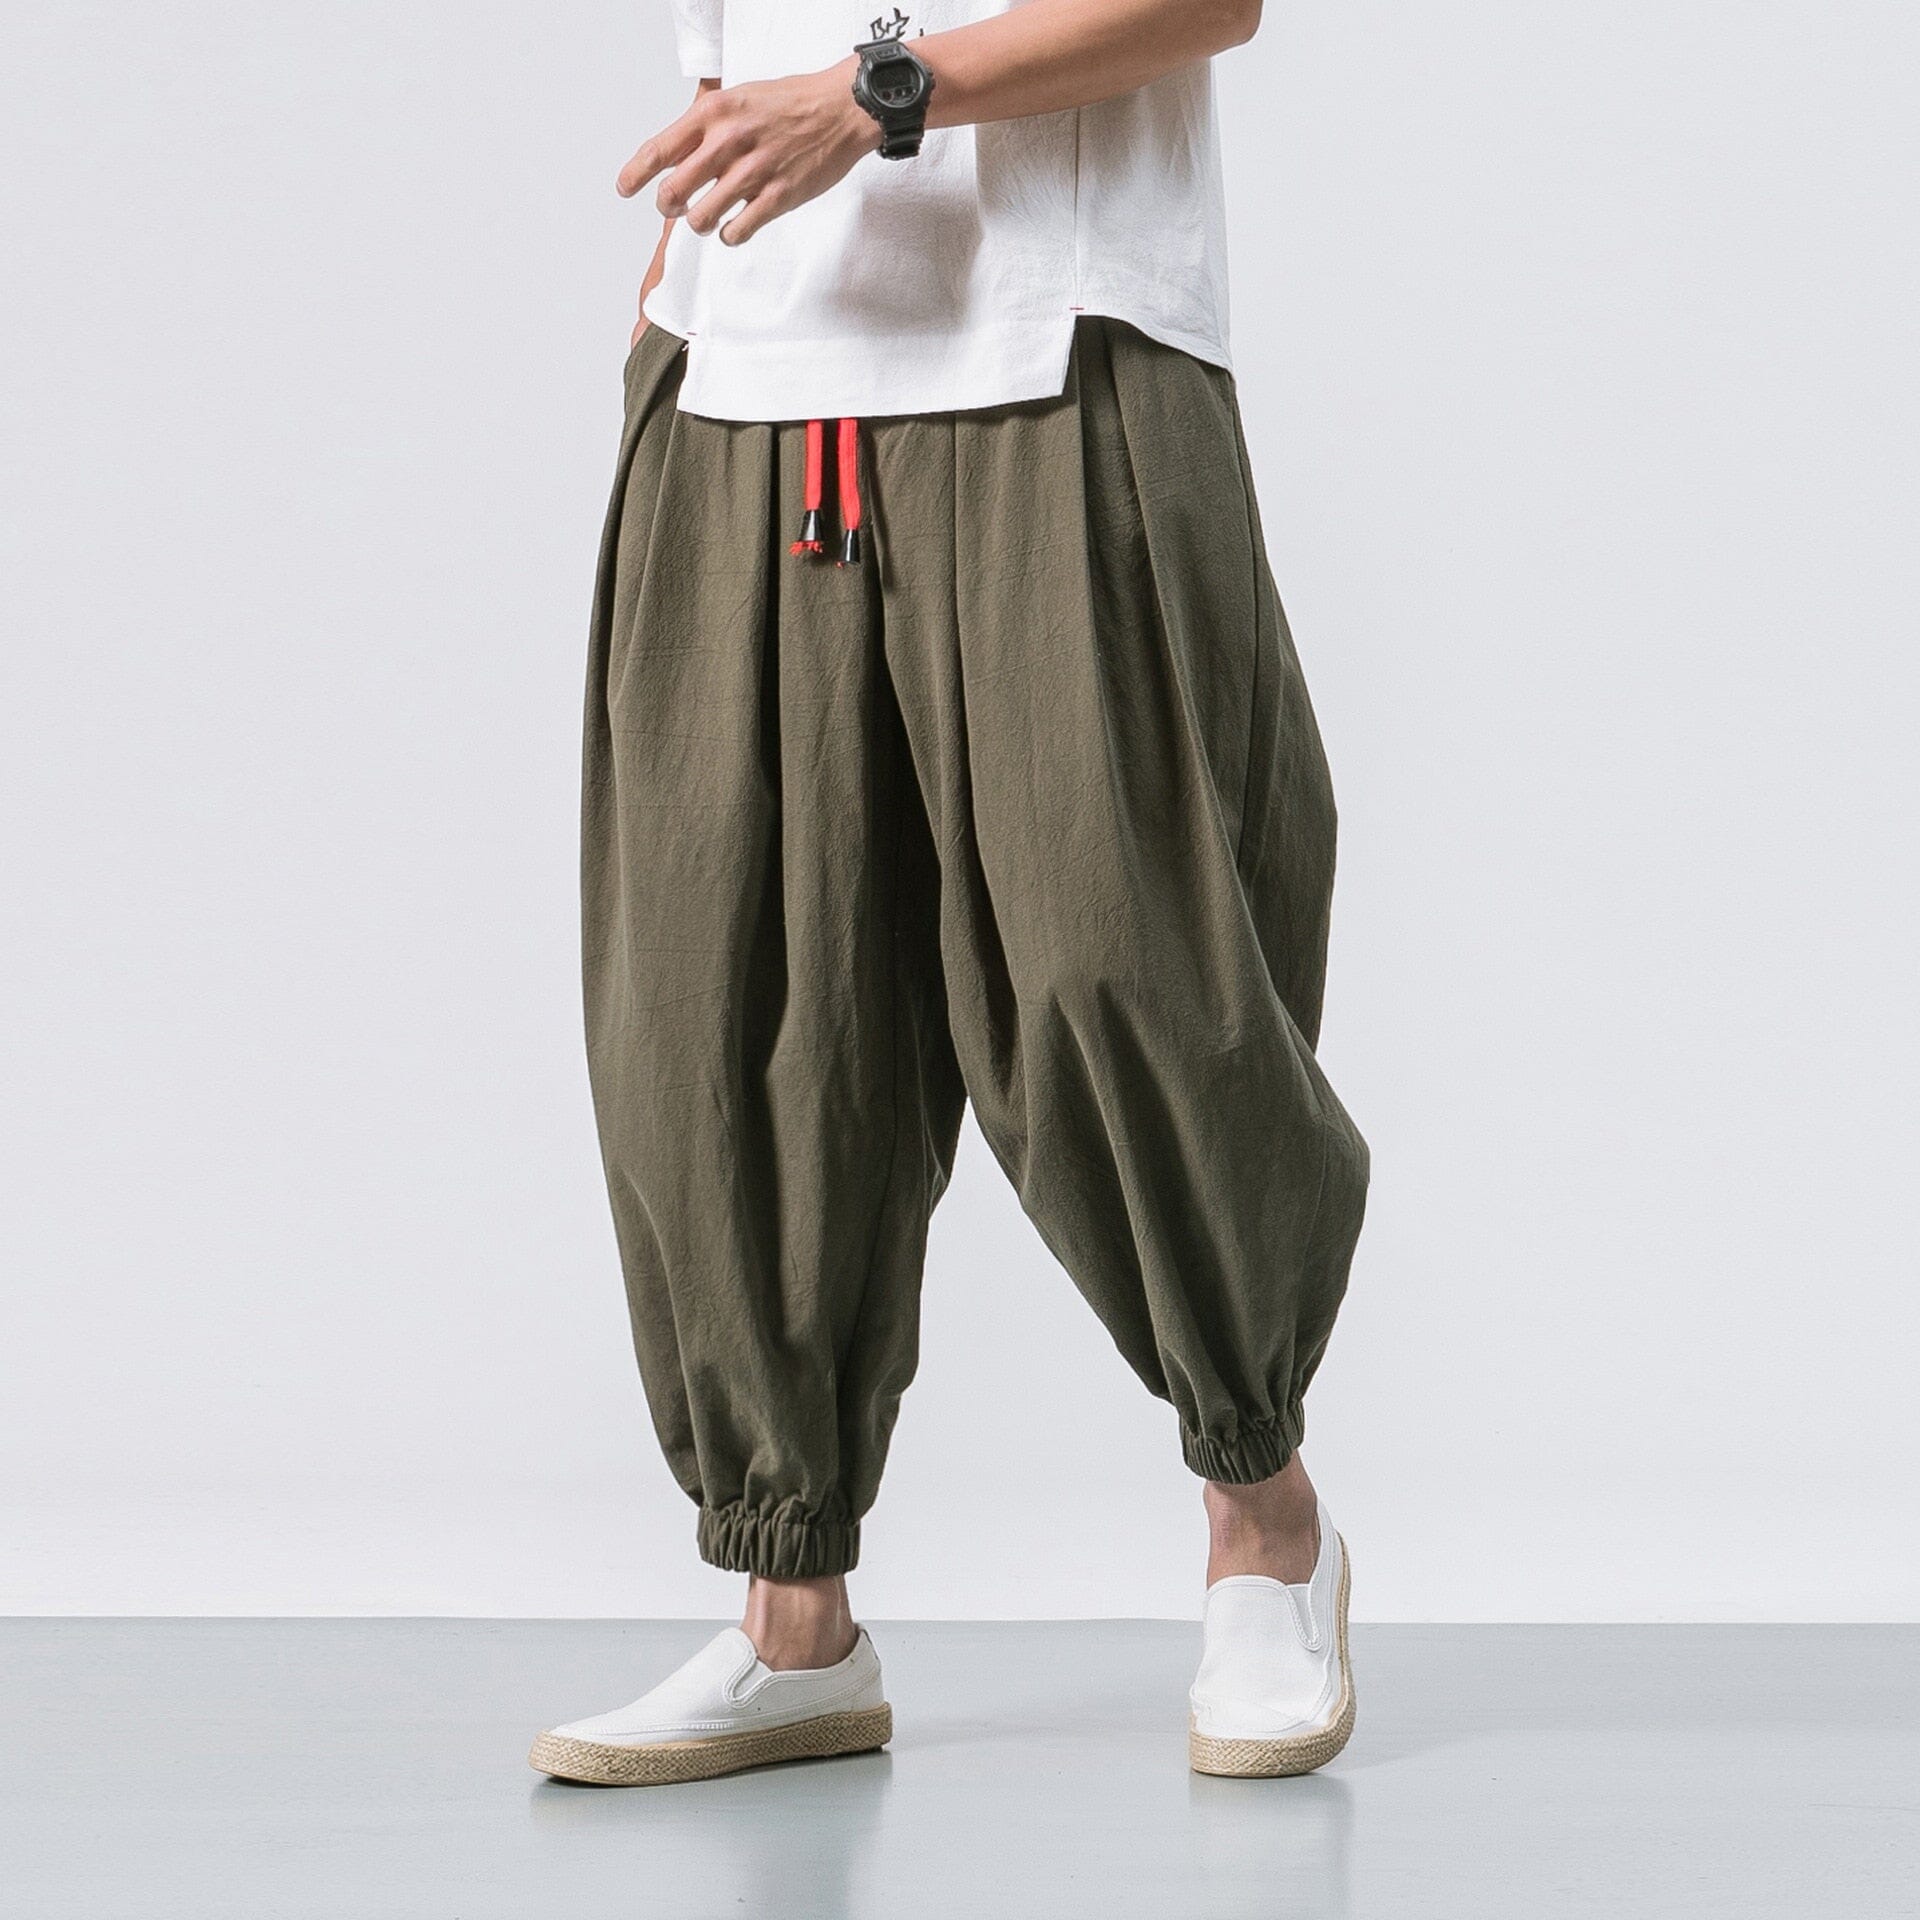 FGKKS Spring Men Loose Harem Pants Chinese Linen Overweight Sweatpants High Quality Casual Brand Oversize Trousers Male 0 GatoGeek Amry Green Asian Size XXXL 